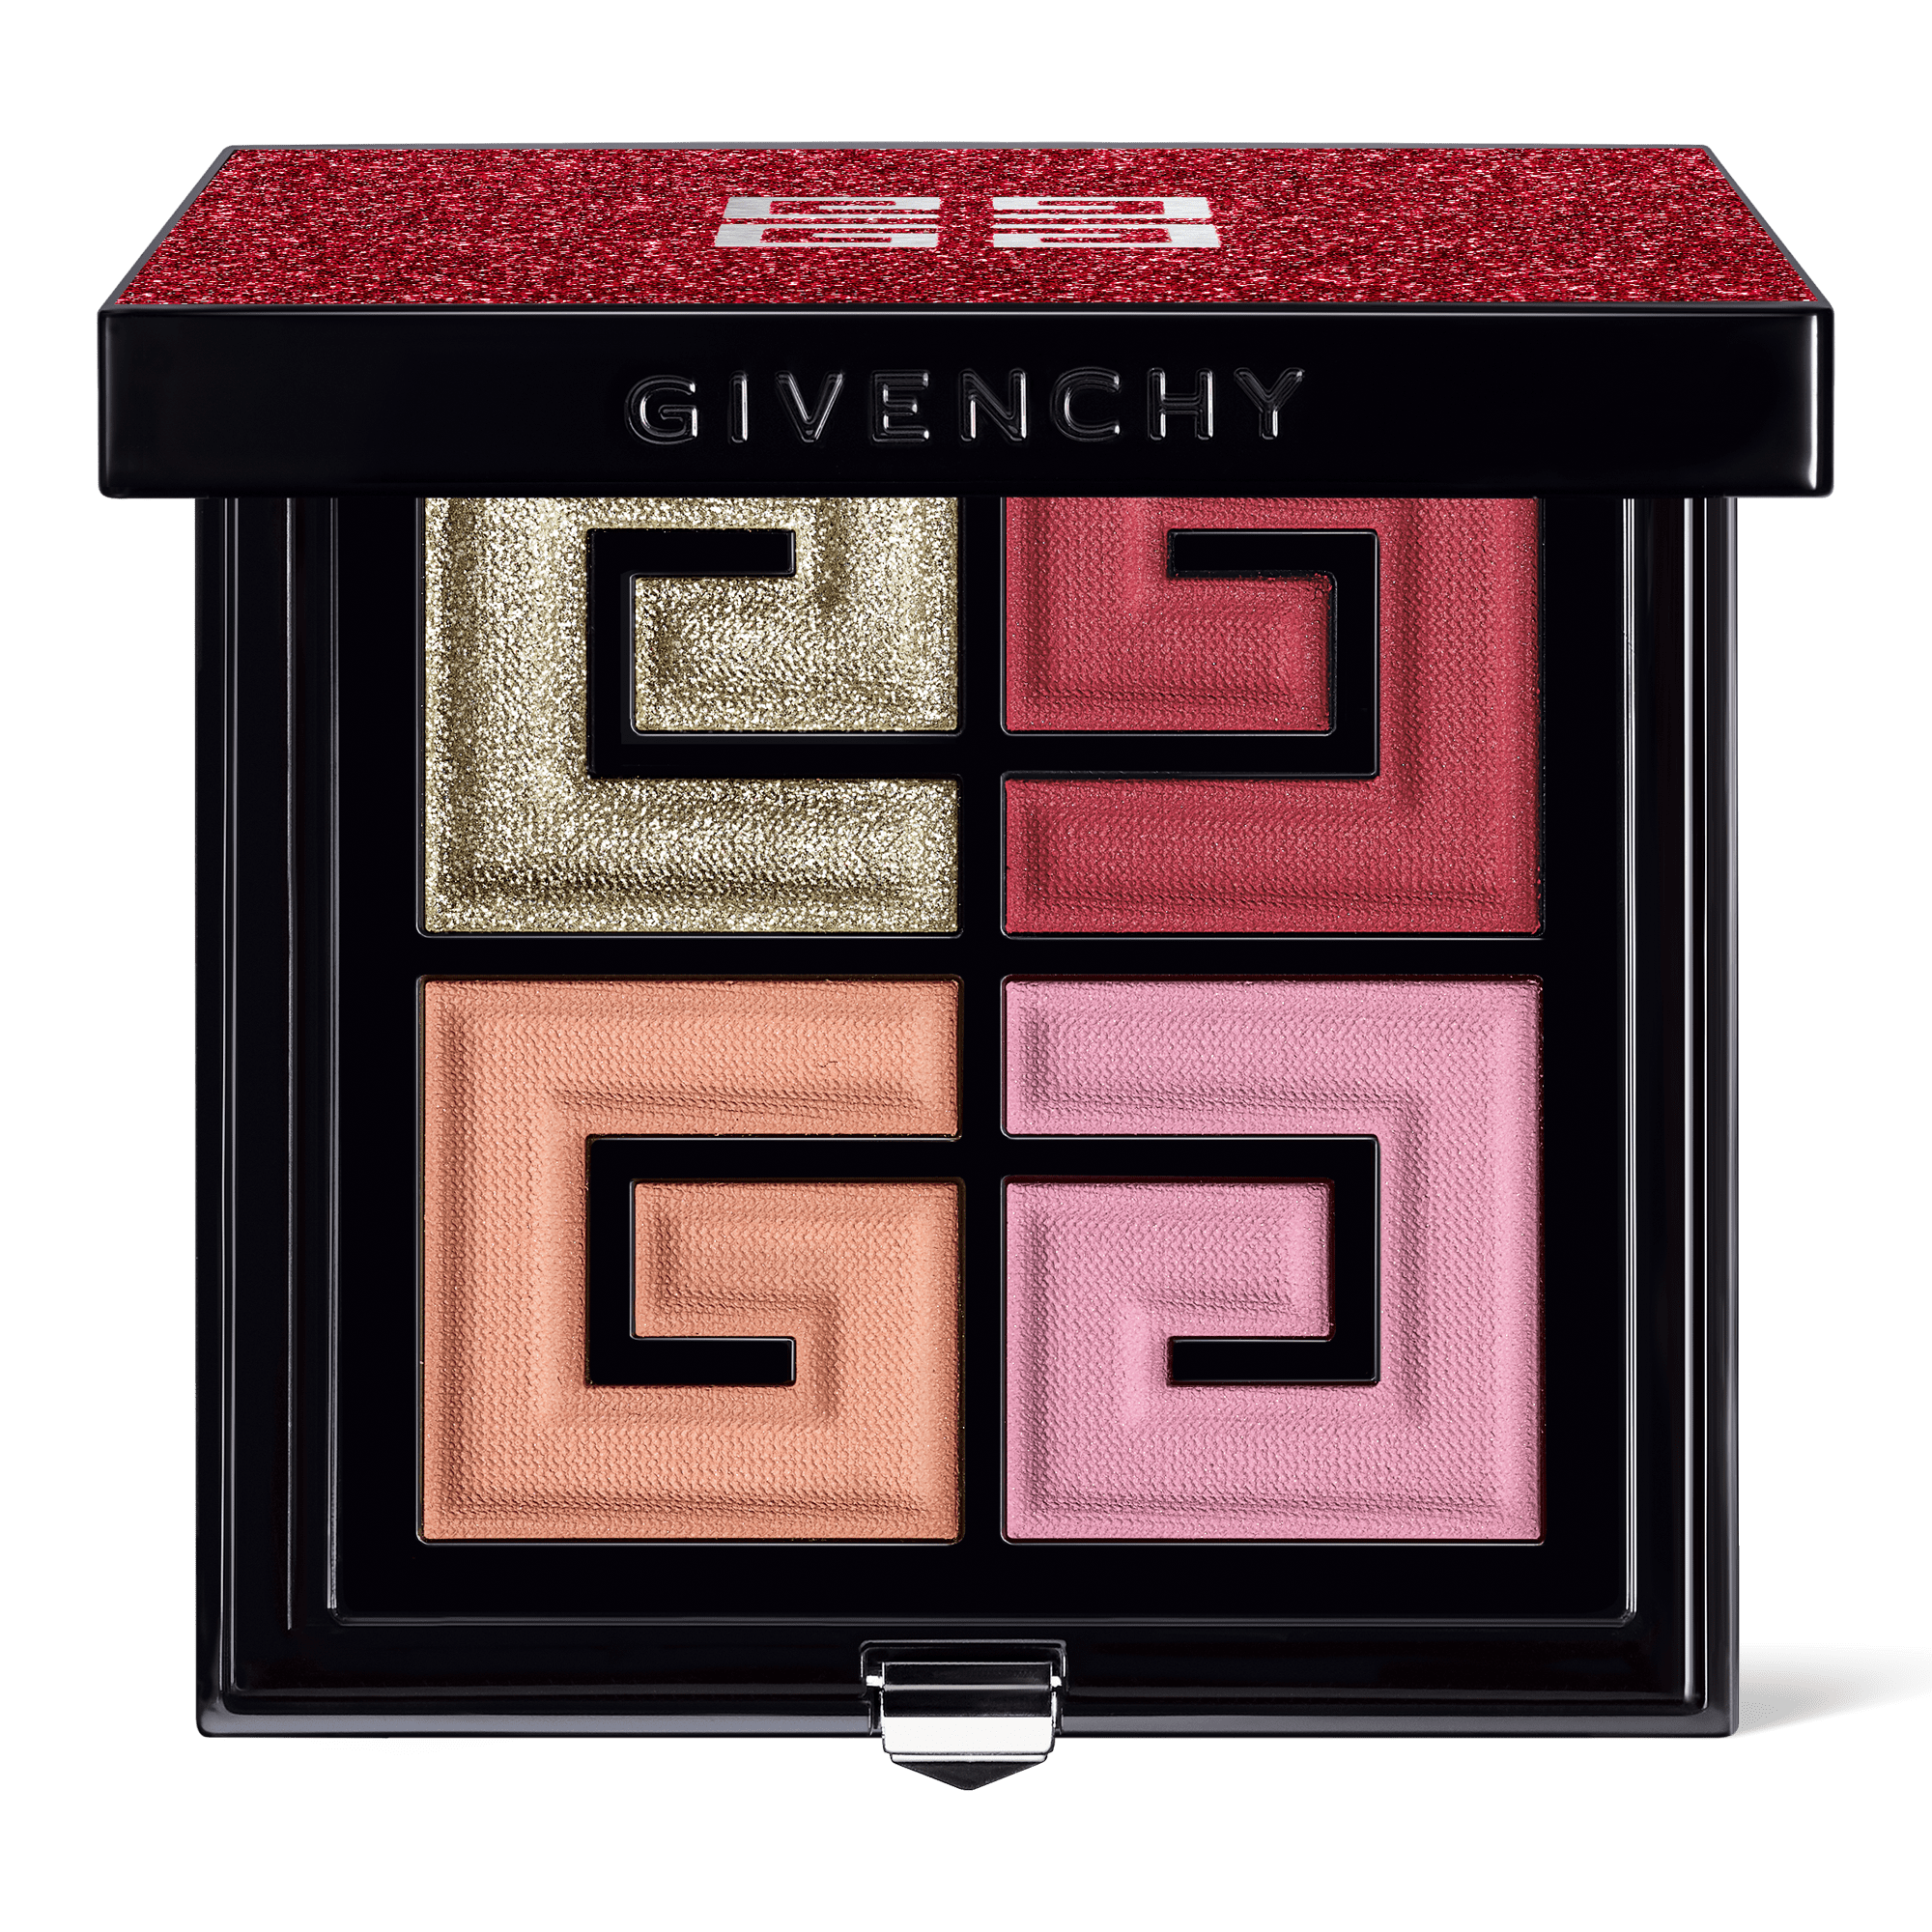 givenchy limited edition 2019